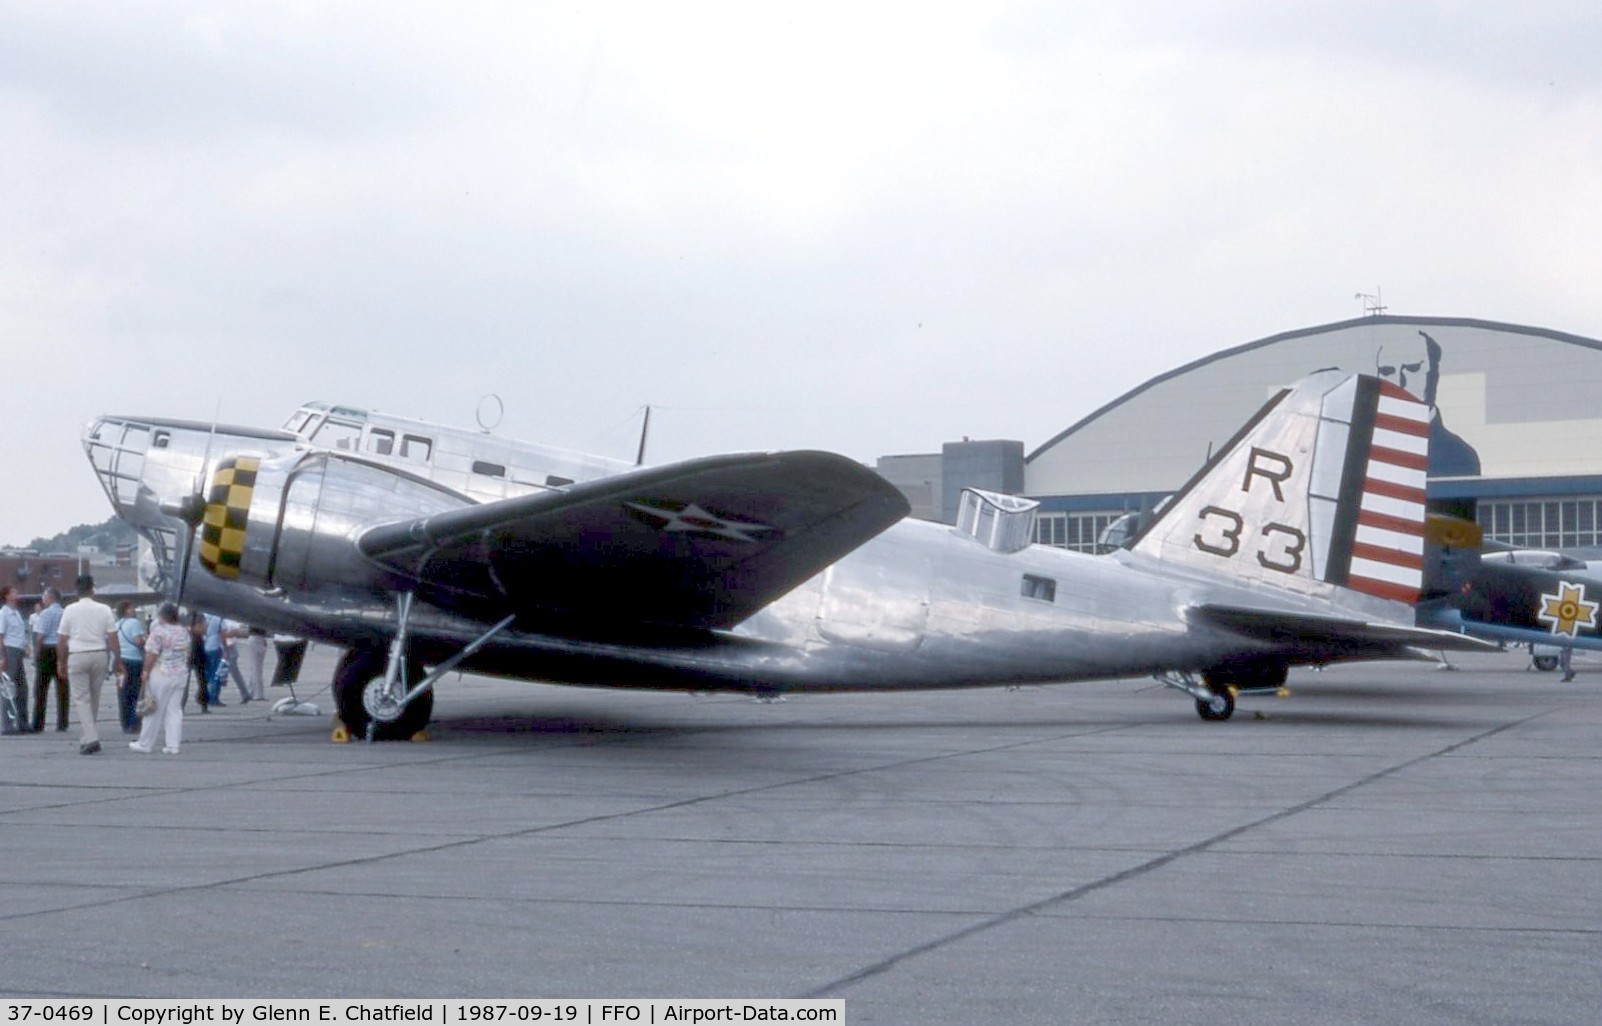 37-0469, 1937 Douglas B-18A Bolo C/N 2469, B-18A of the National Museum of the U. S. Air Force